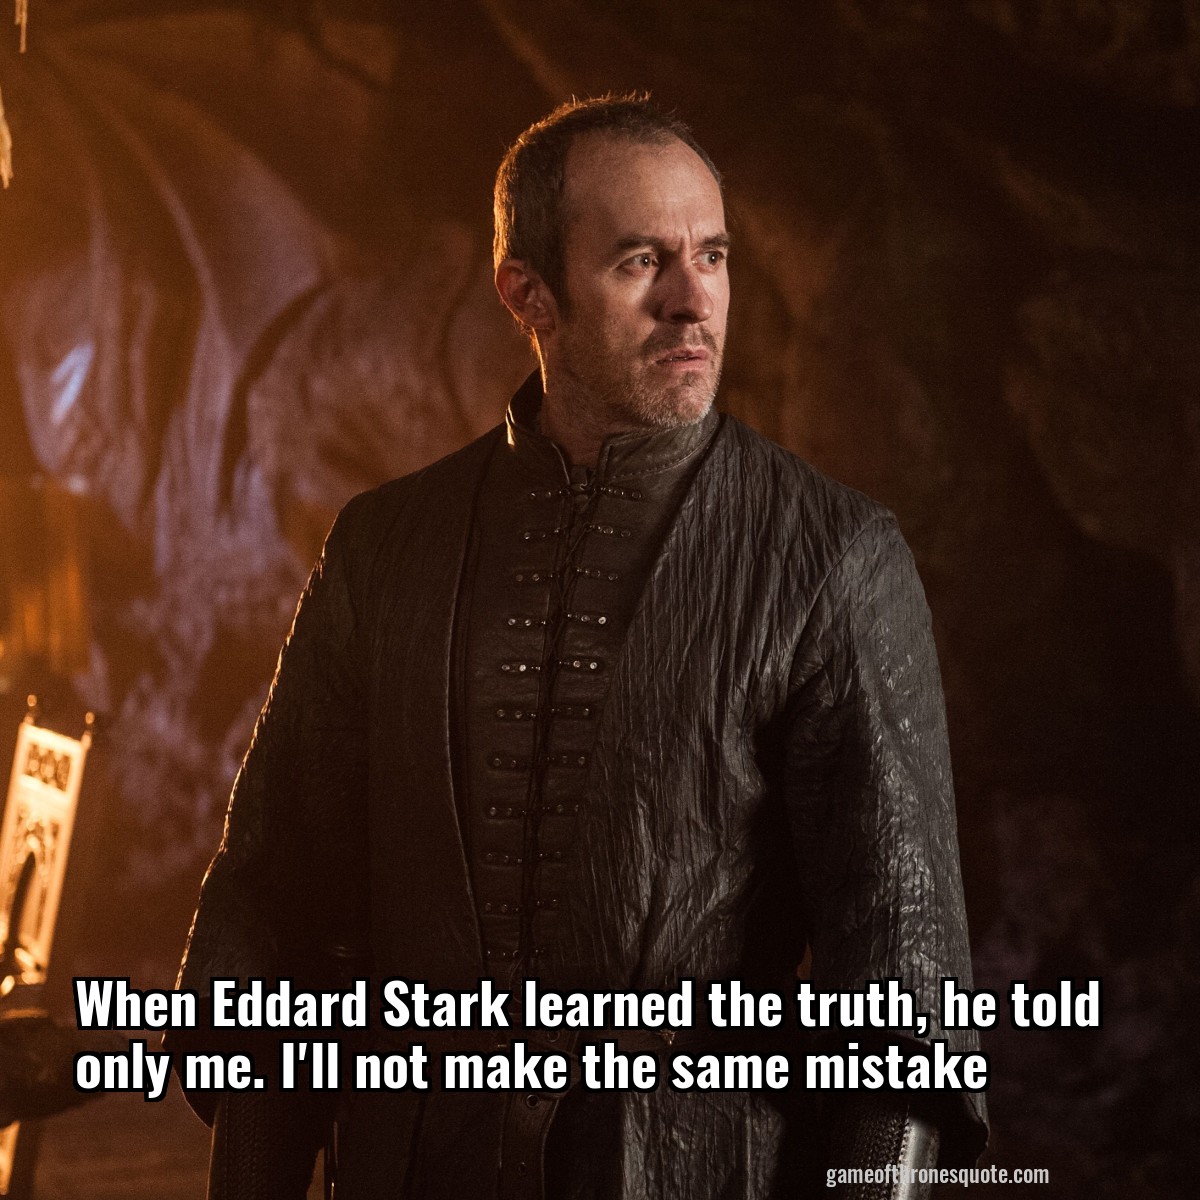 When Eddard Stark learned the truth, he told only me. I'll not make the same mistake